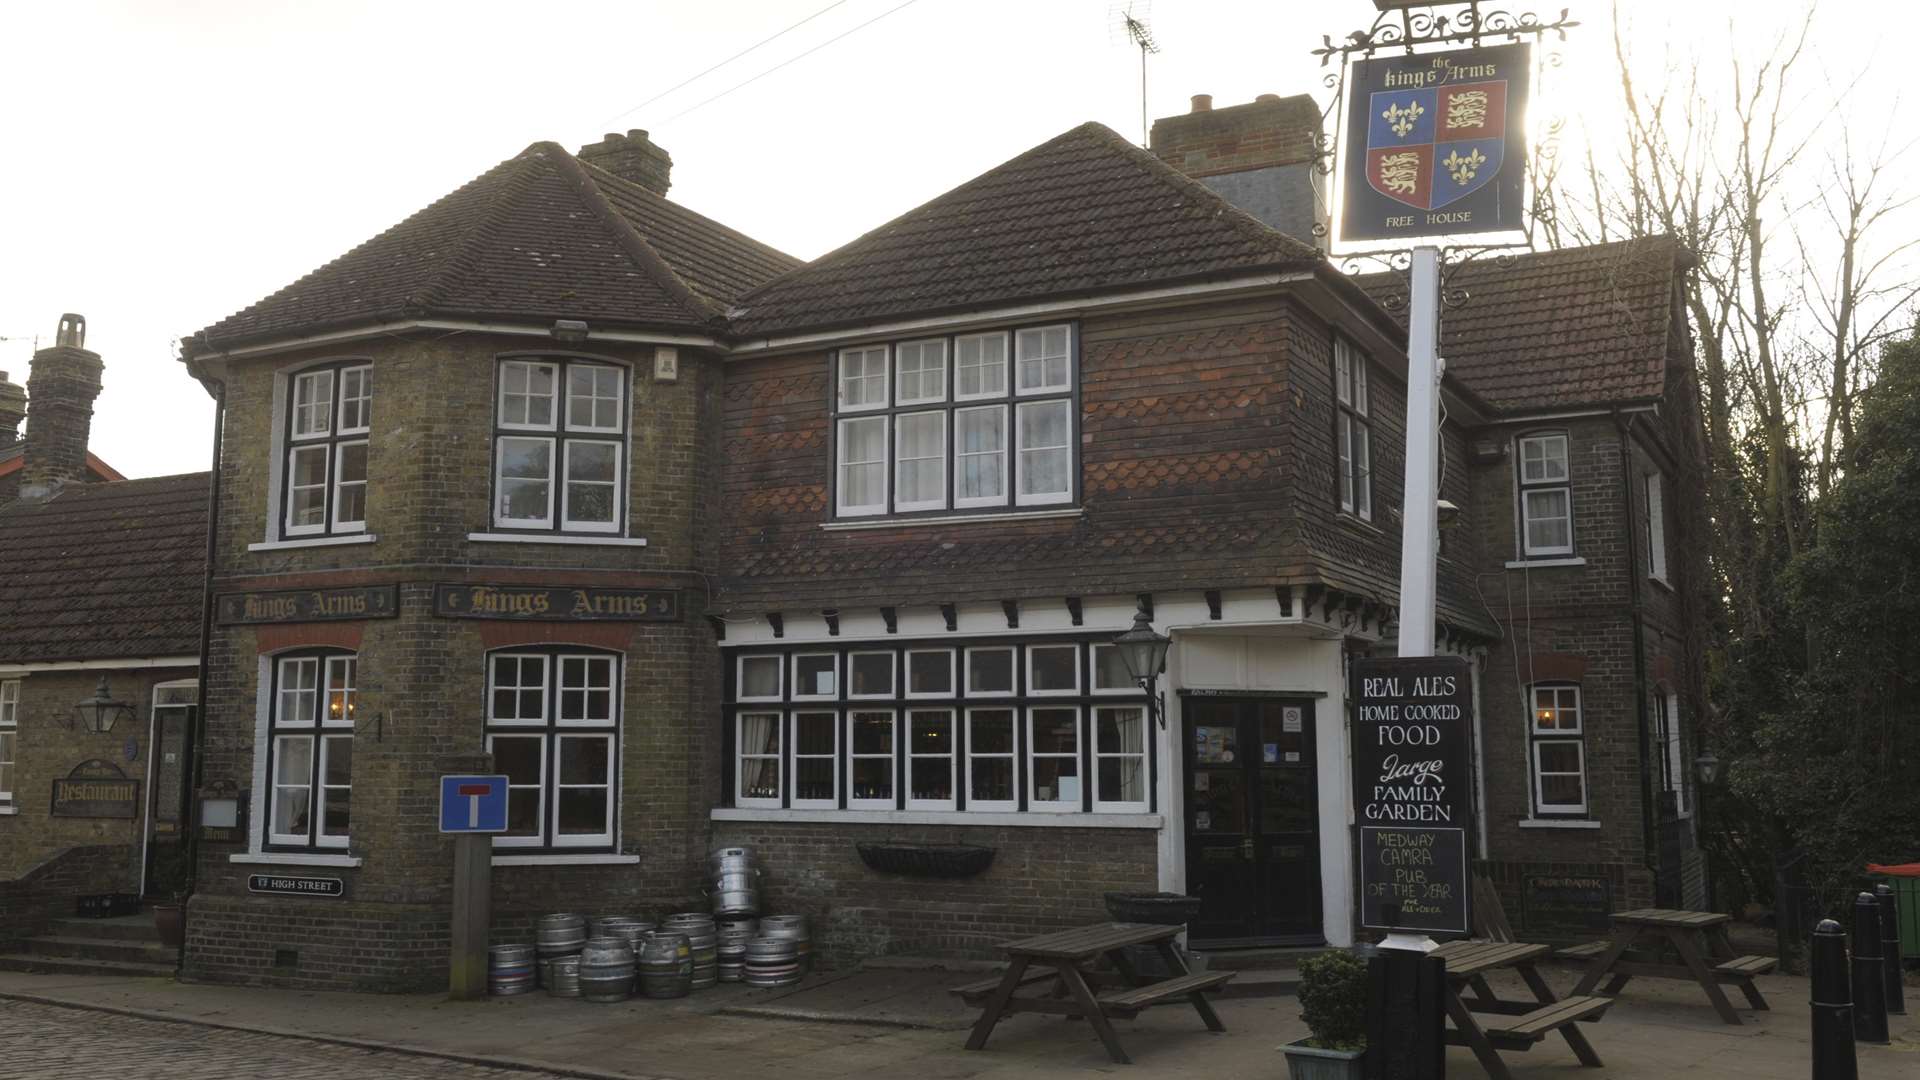 The King's Arms at Upper Upnor